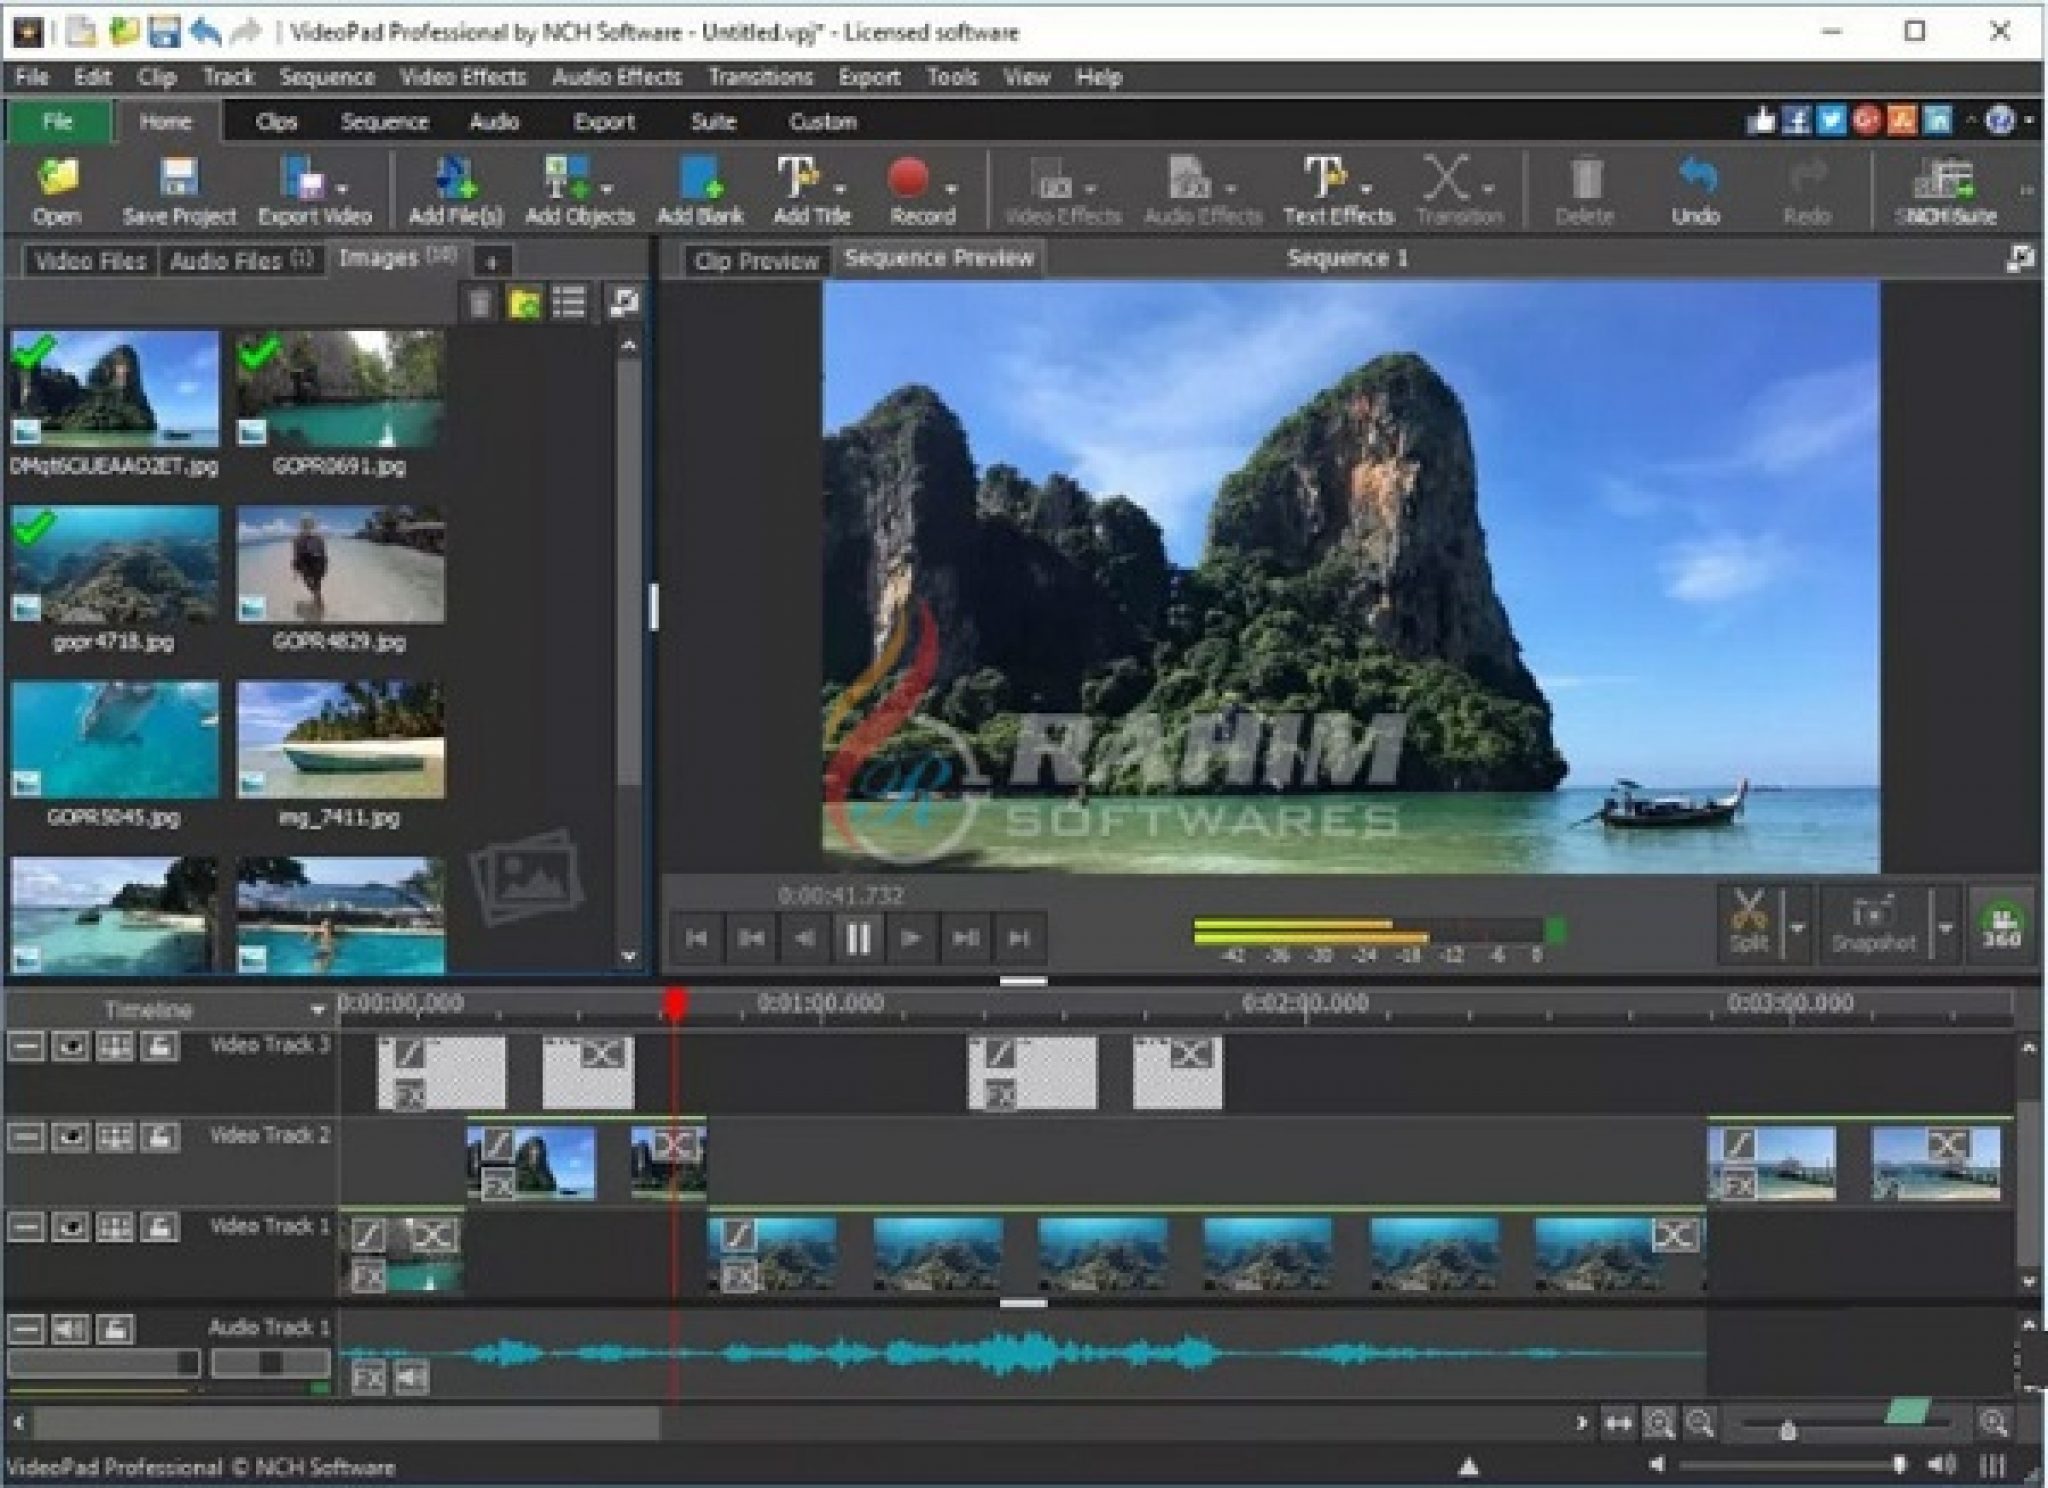 NCH VideoPad Video Editor Pro 13.59 download the last version for windows